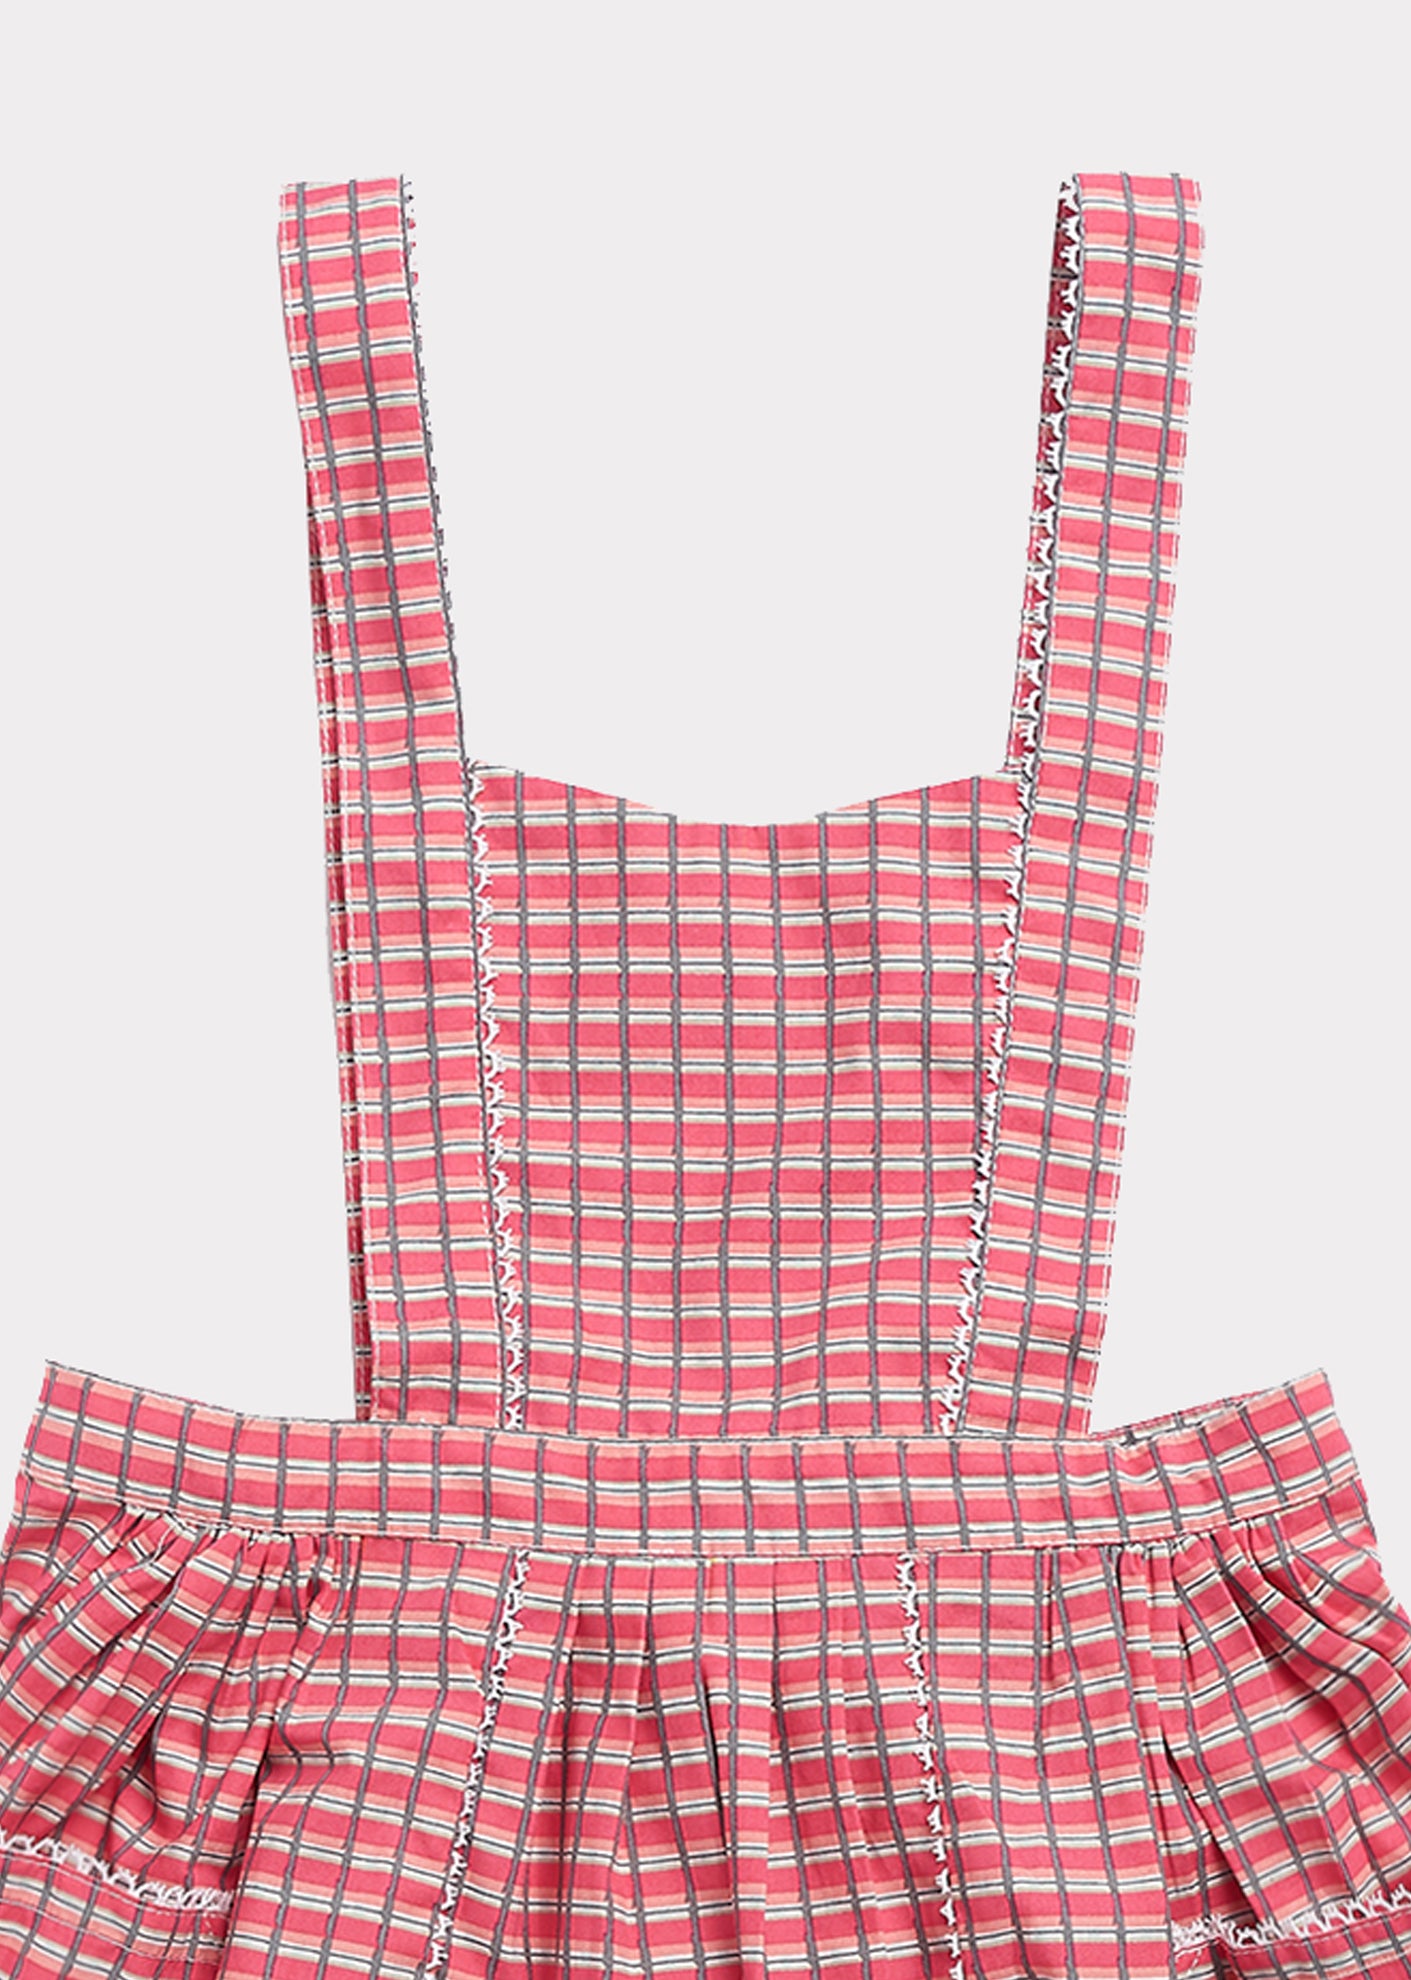 Girls Red Painted Check Cotton Dress